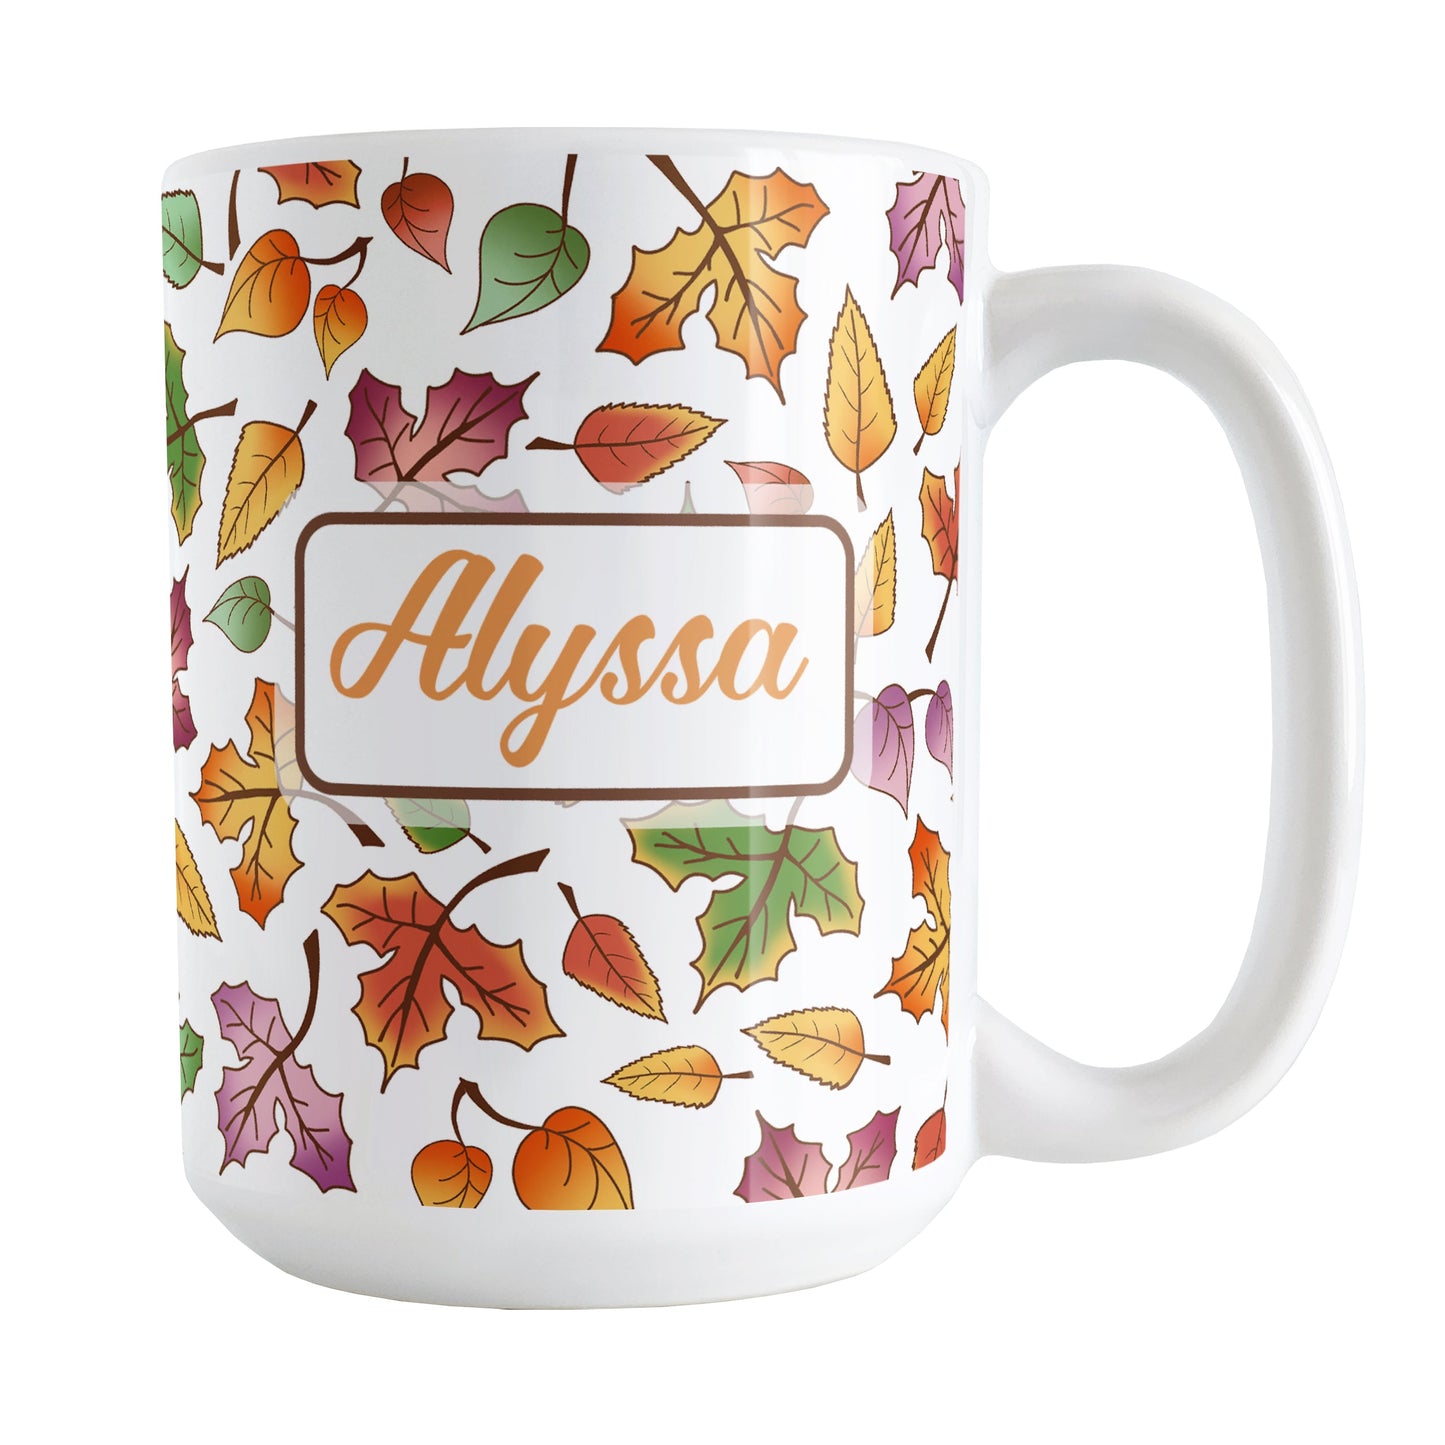 Personalized Changing Leaves Fall Mug (15oz) at Amy's Coffee Mugs. A ceramic coffee mug designed with a fall themed pattern of leaves changing colors, as they do at the beginning of autumn, that wraps around the mug. Your personalized name is custom printed in an orange script font on both sides of the mug over the leaves pattern.